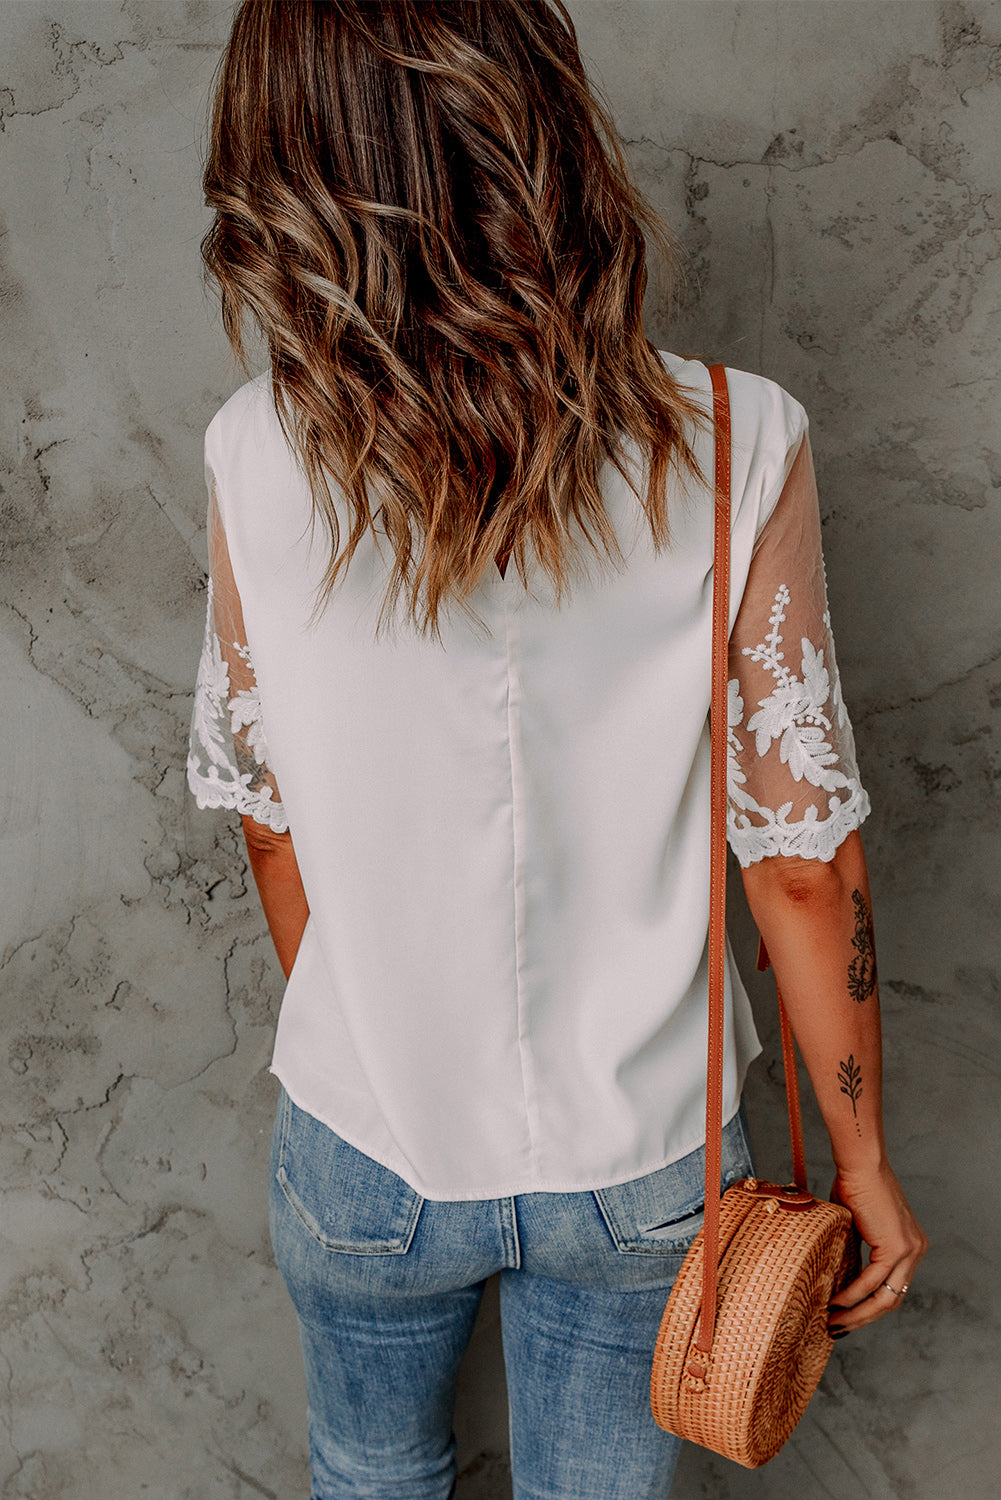 Chic White Floral Lace Short Sleeve Top